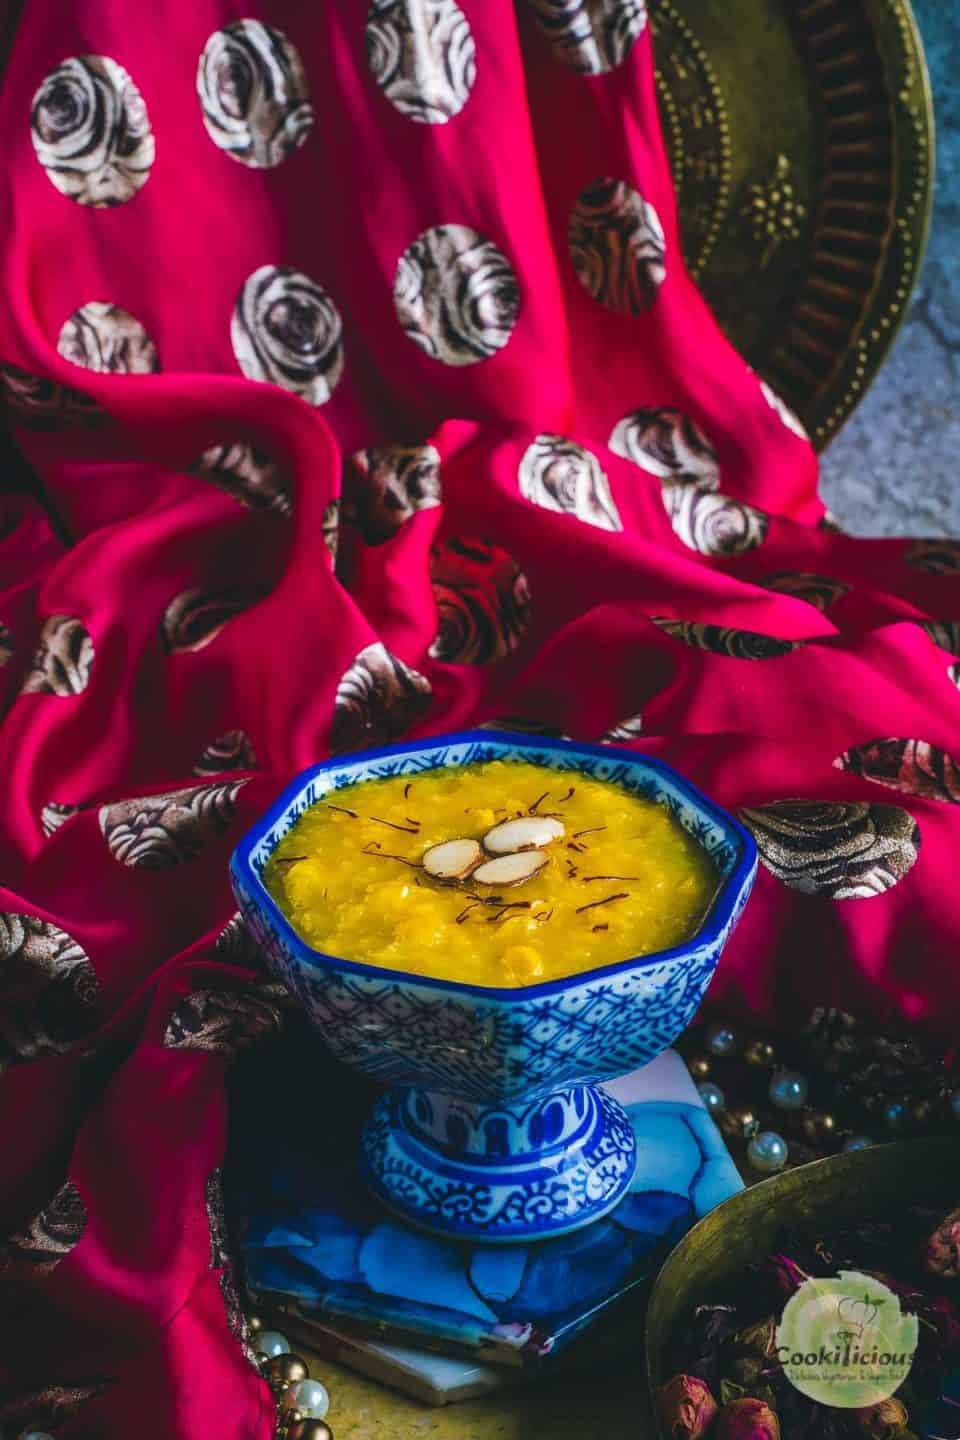 A decorative piece of cloth on the background of a bowl filled with Jhajhariya (vegan coconut milk pudding)